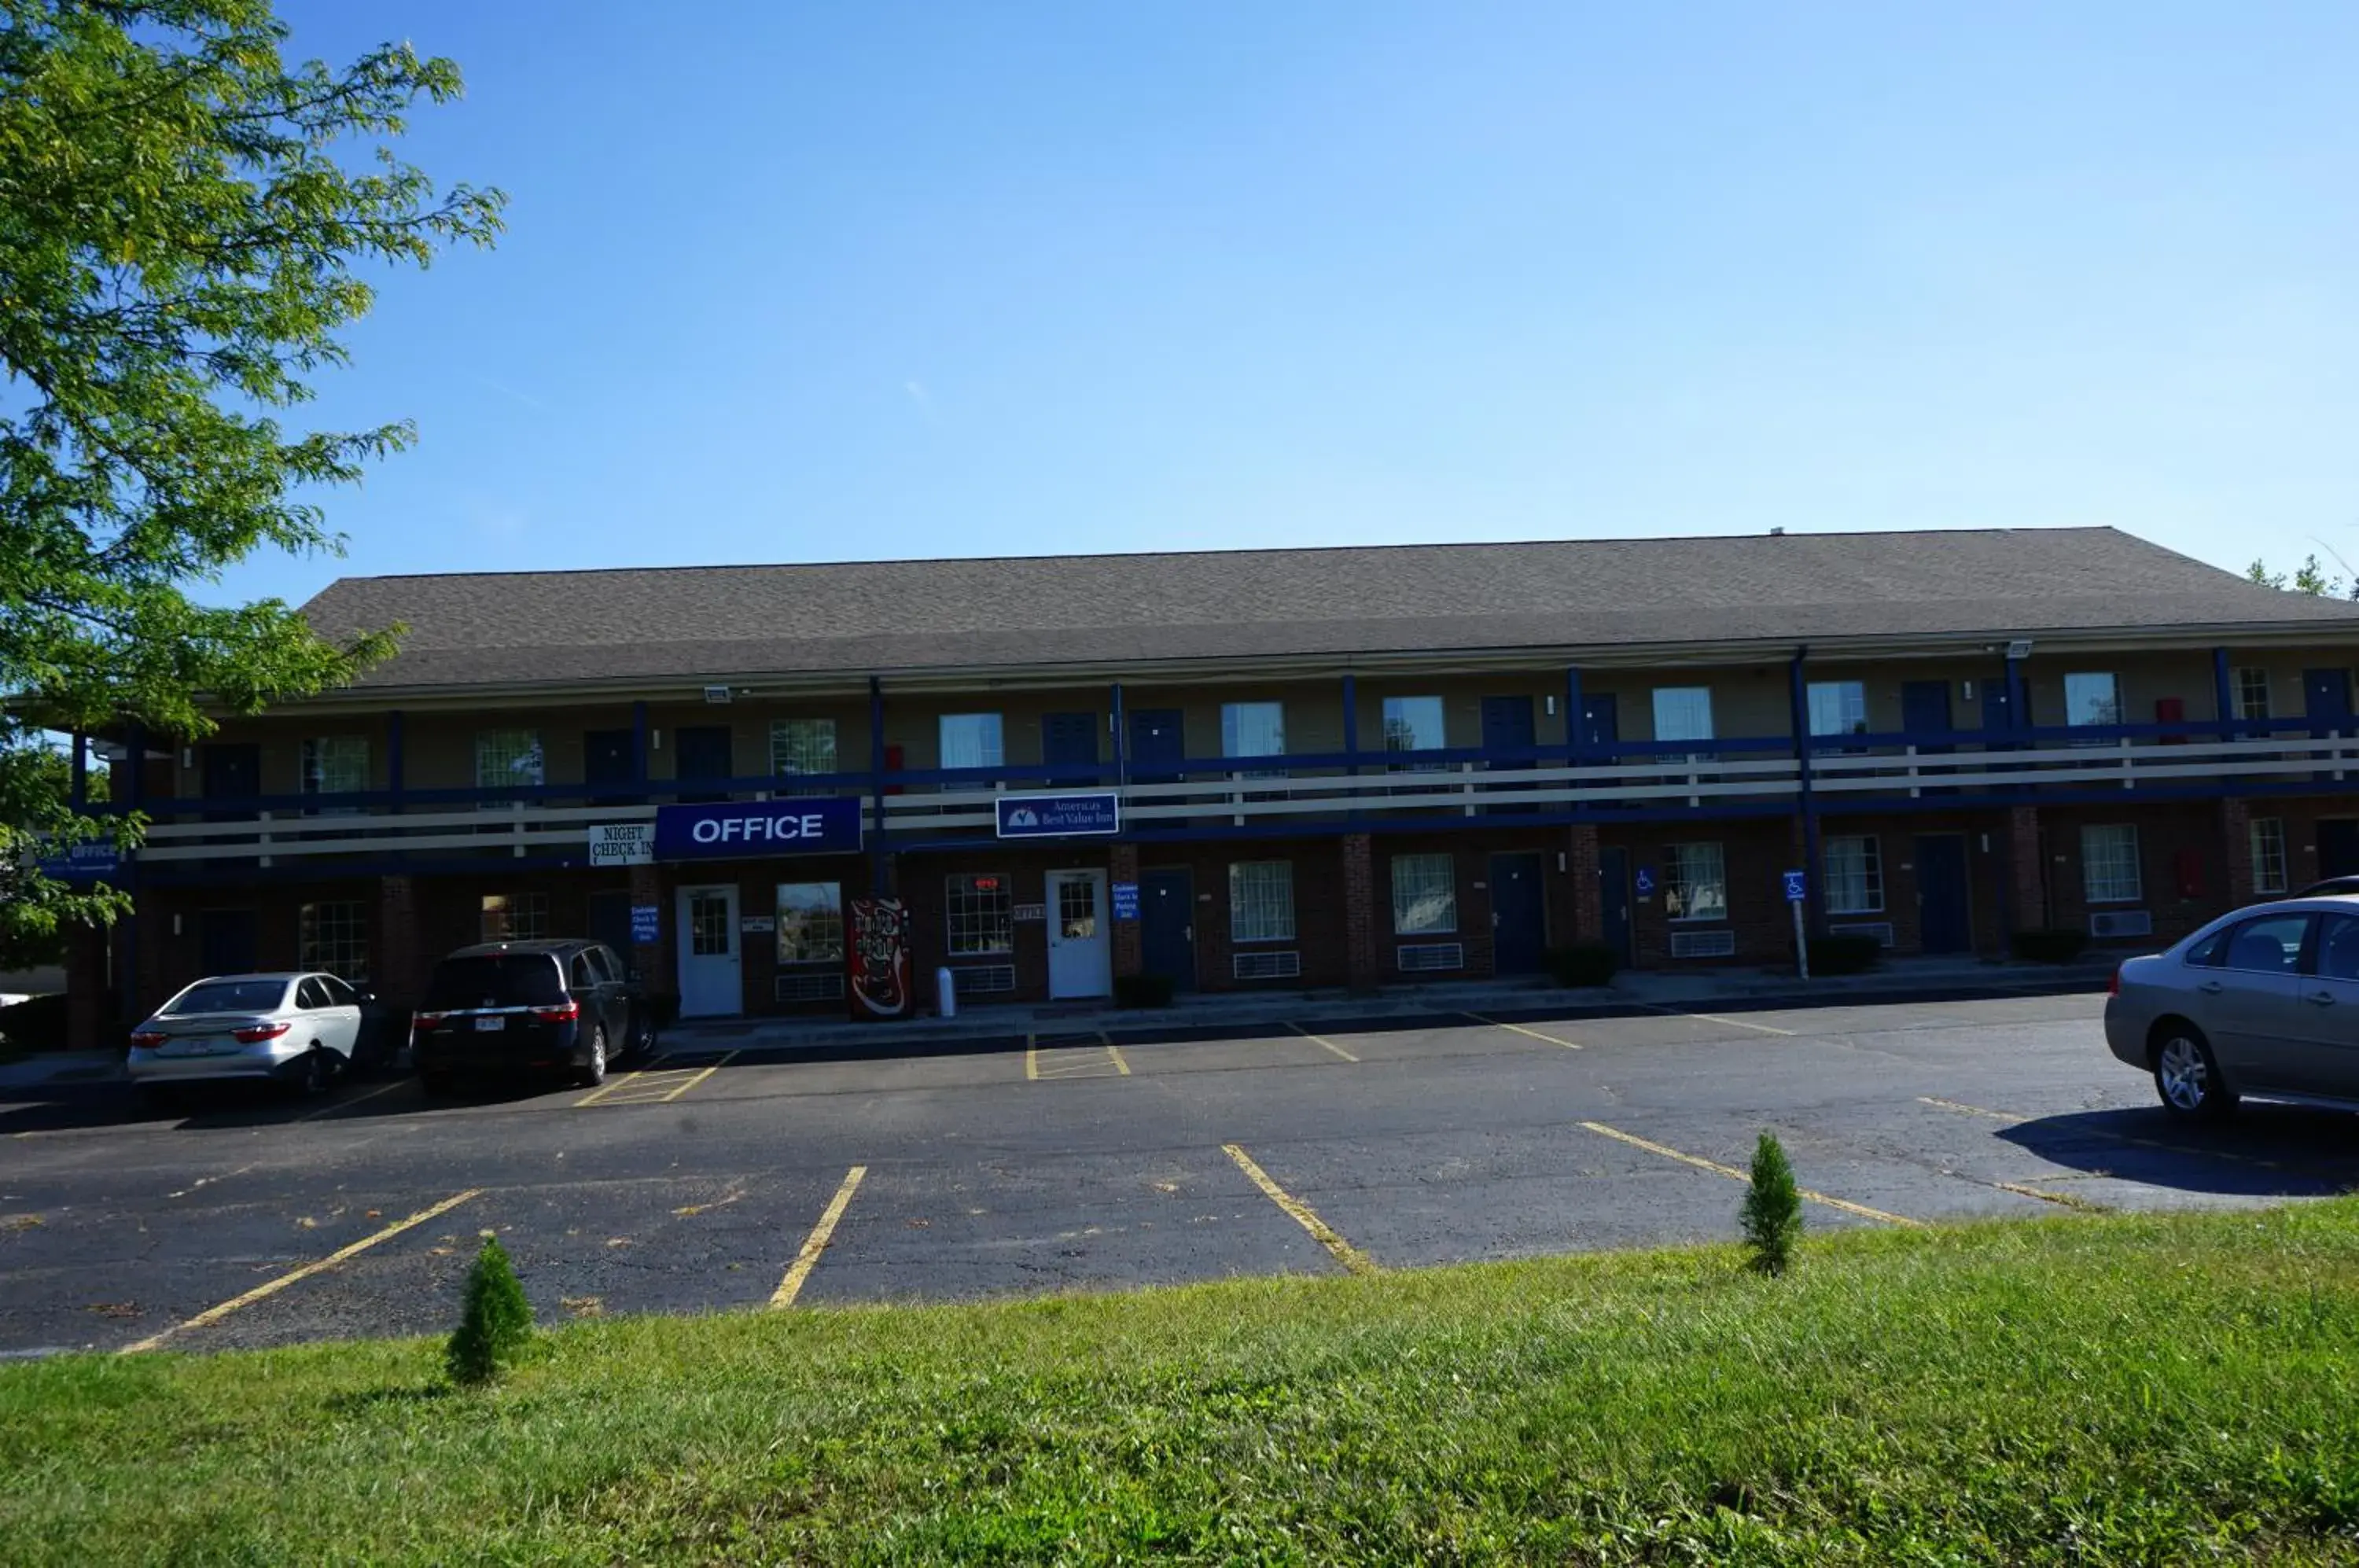 Property Building in Americas Best Value Inn Maumee/Toledo